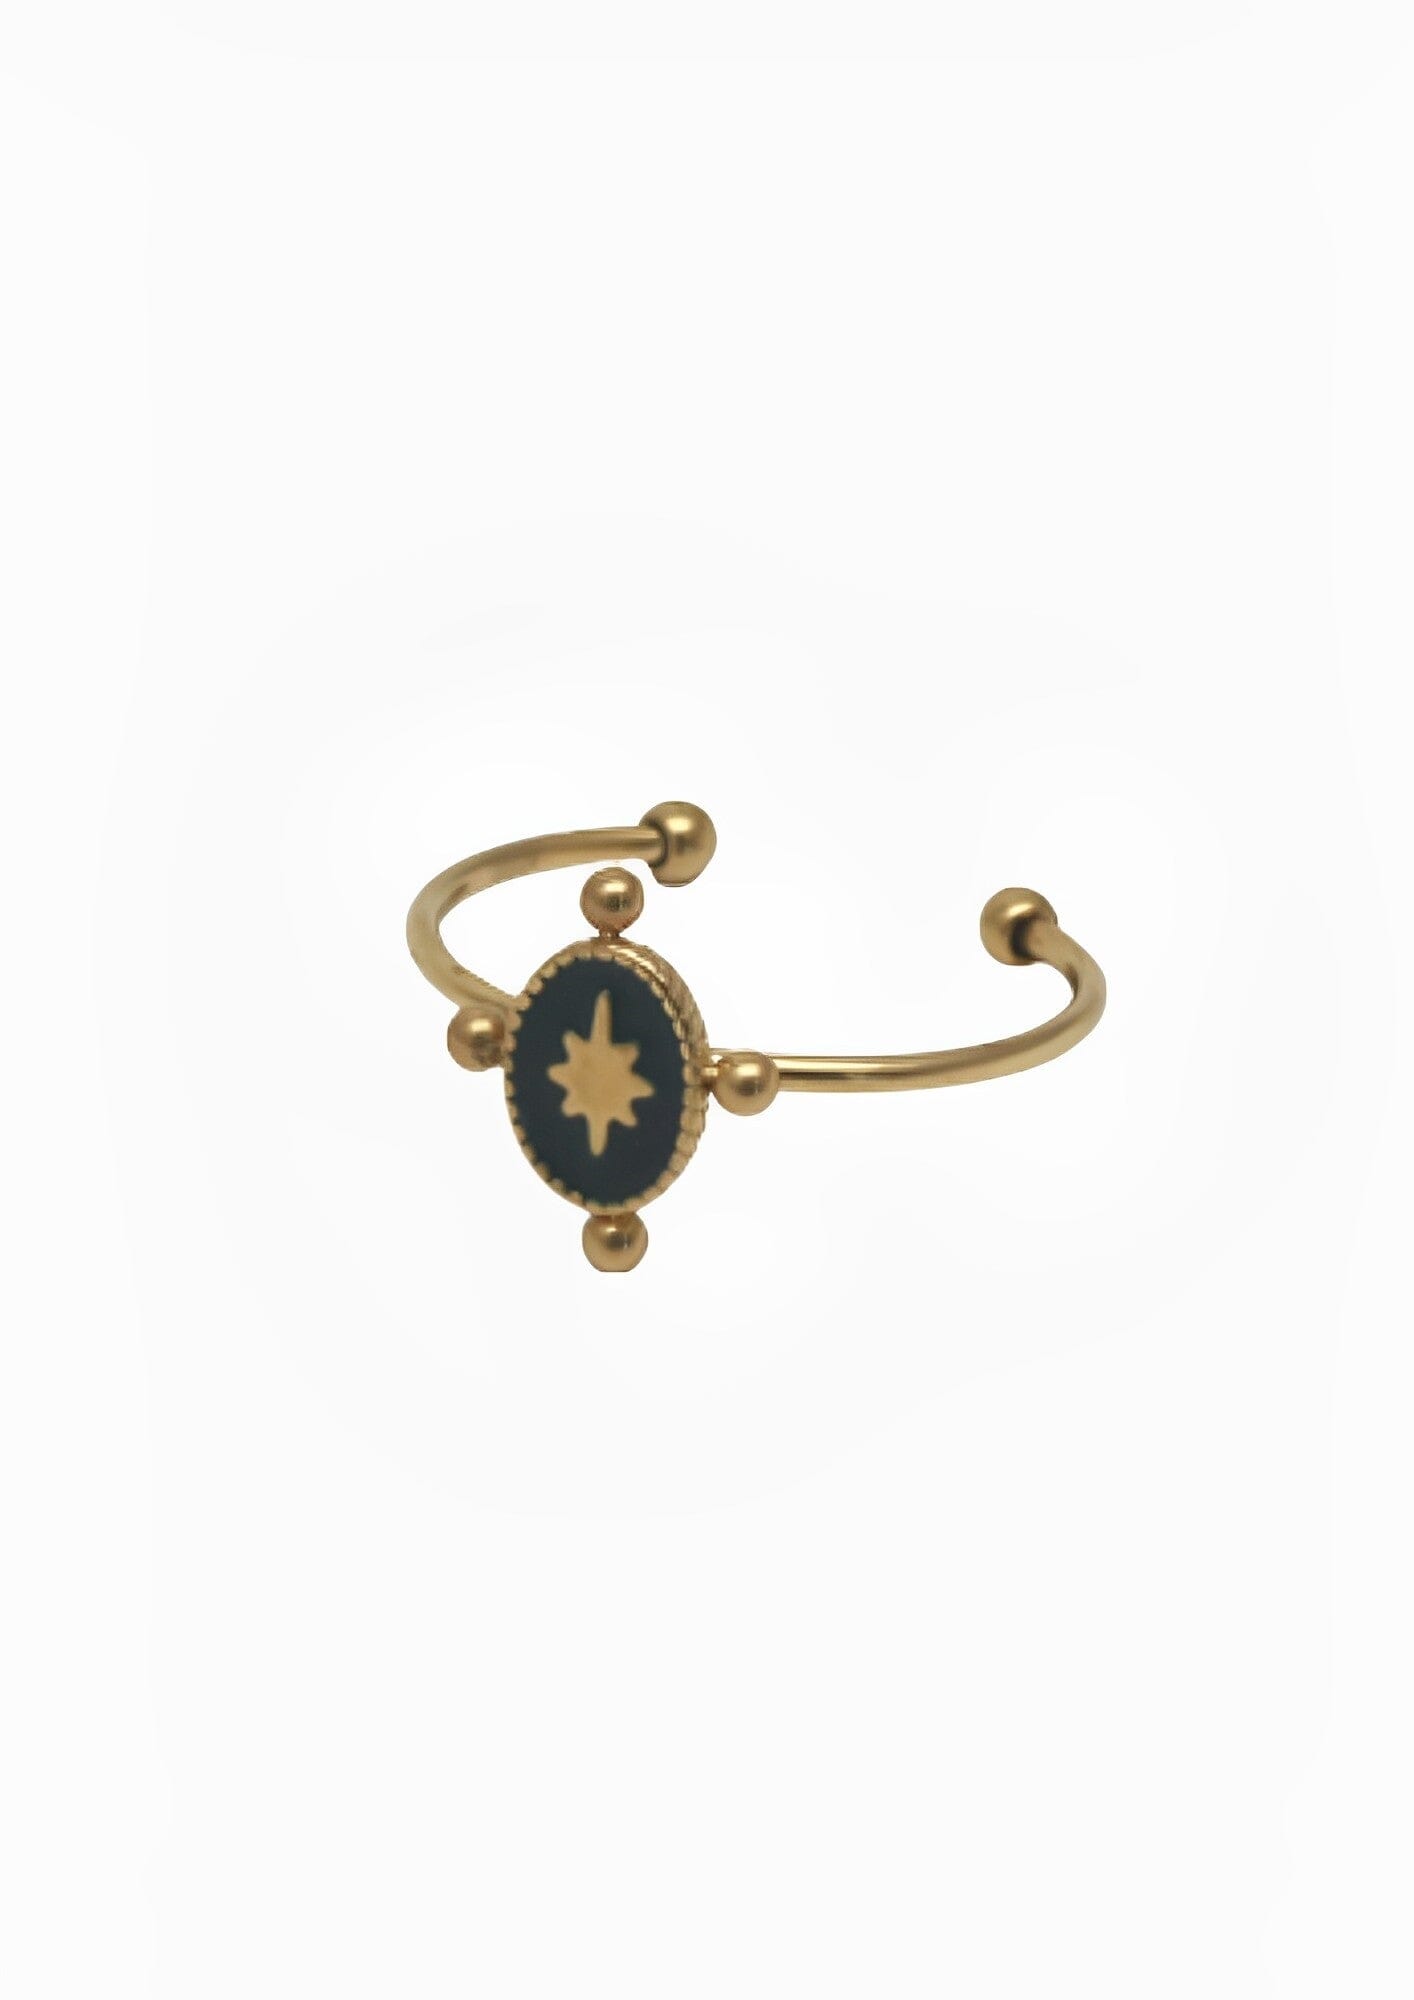 POLARIS RING earing Yubama Jewelry Online Store - The Elegant Designs of Gold and Silver ! 